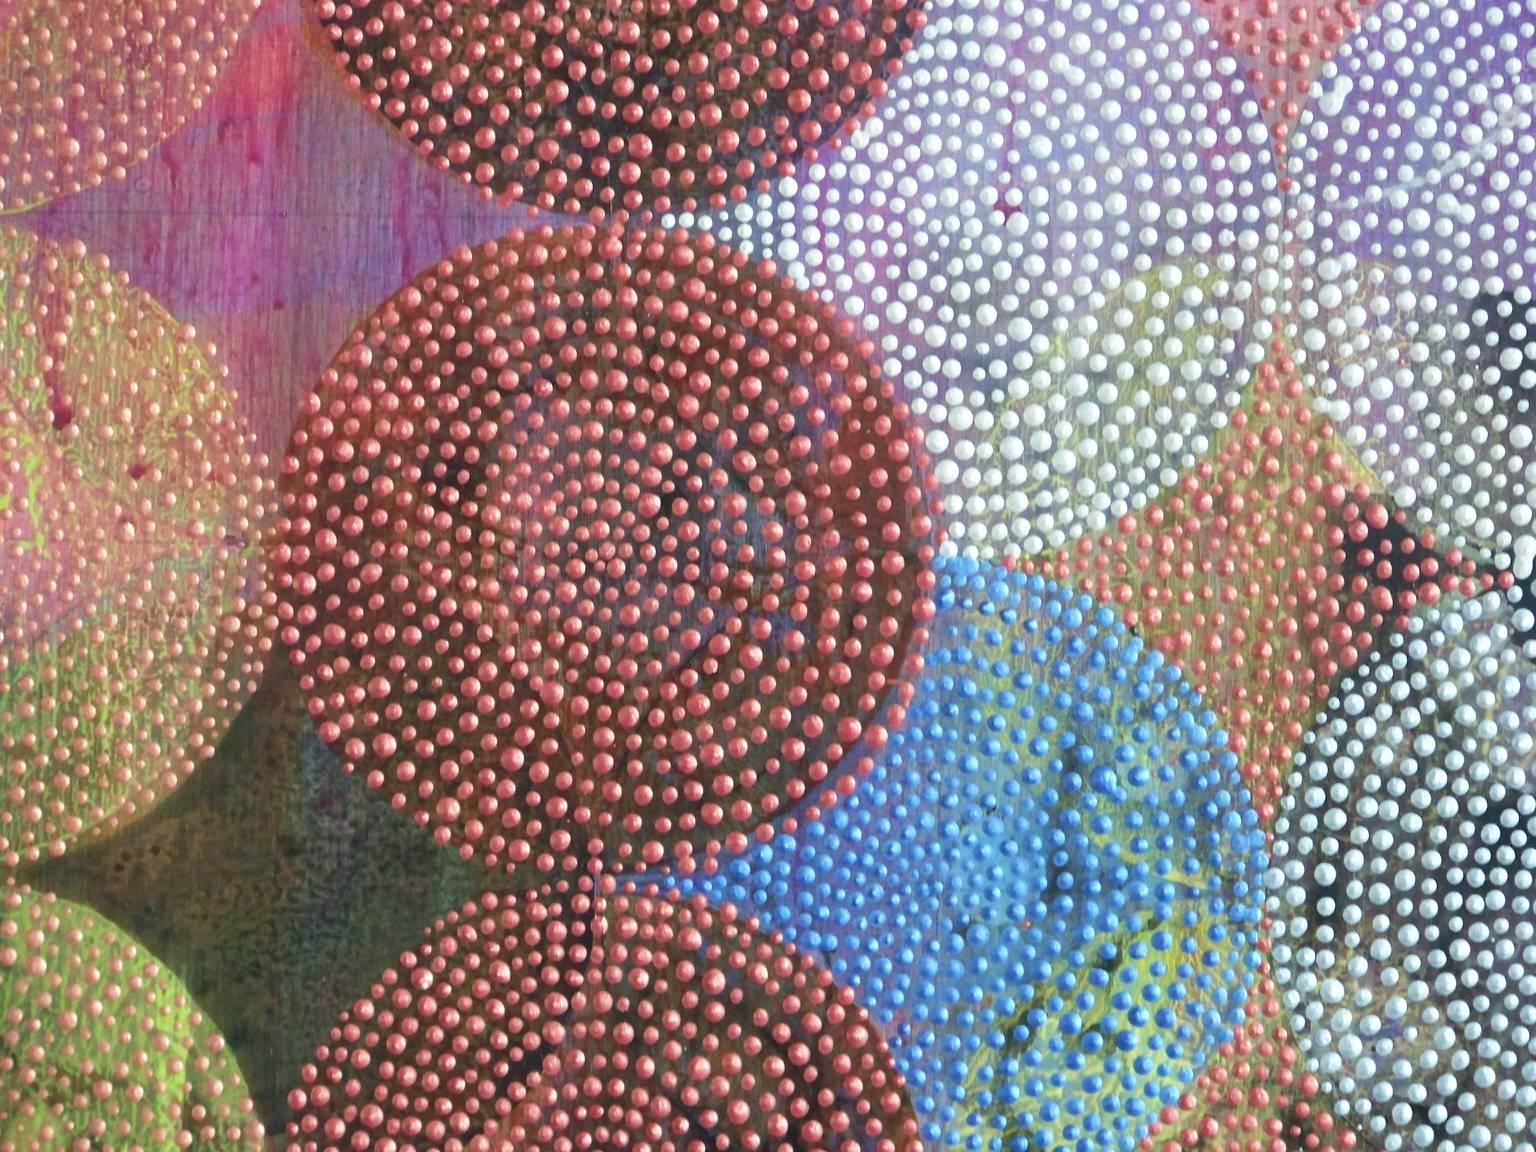 Circles 40 - Painting by Denise Driscoll